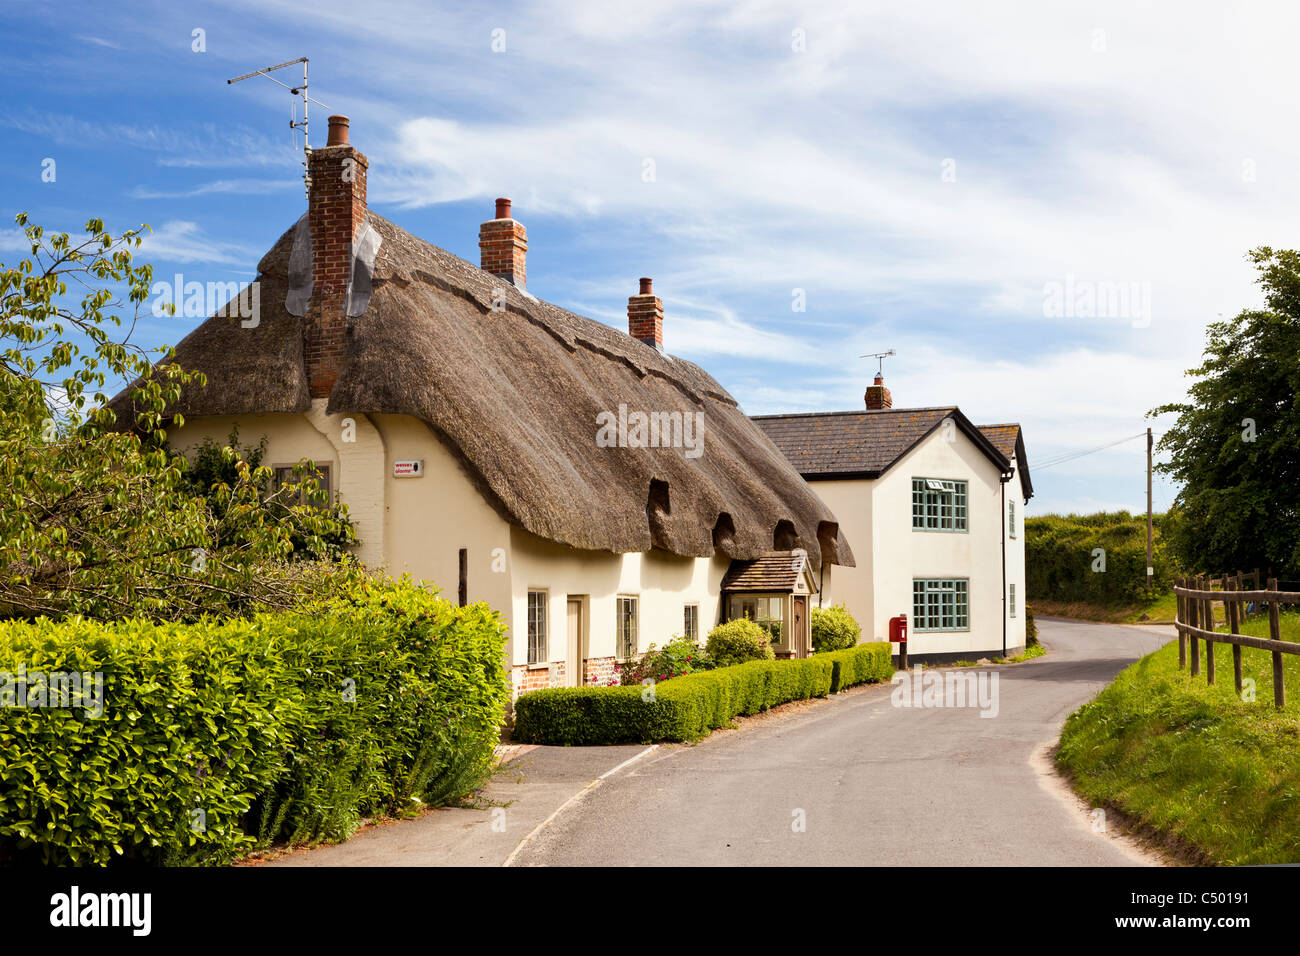 Traditional old detached thatched cottages, in the rural English village of Tarrant Monkton, Dorset, England, UK in summer Stock Photo